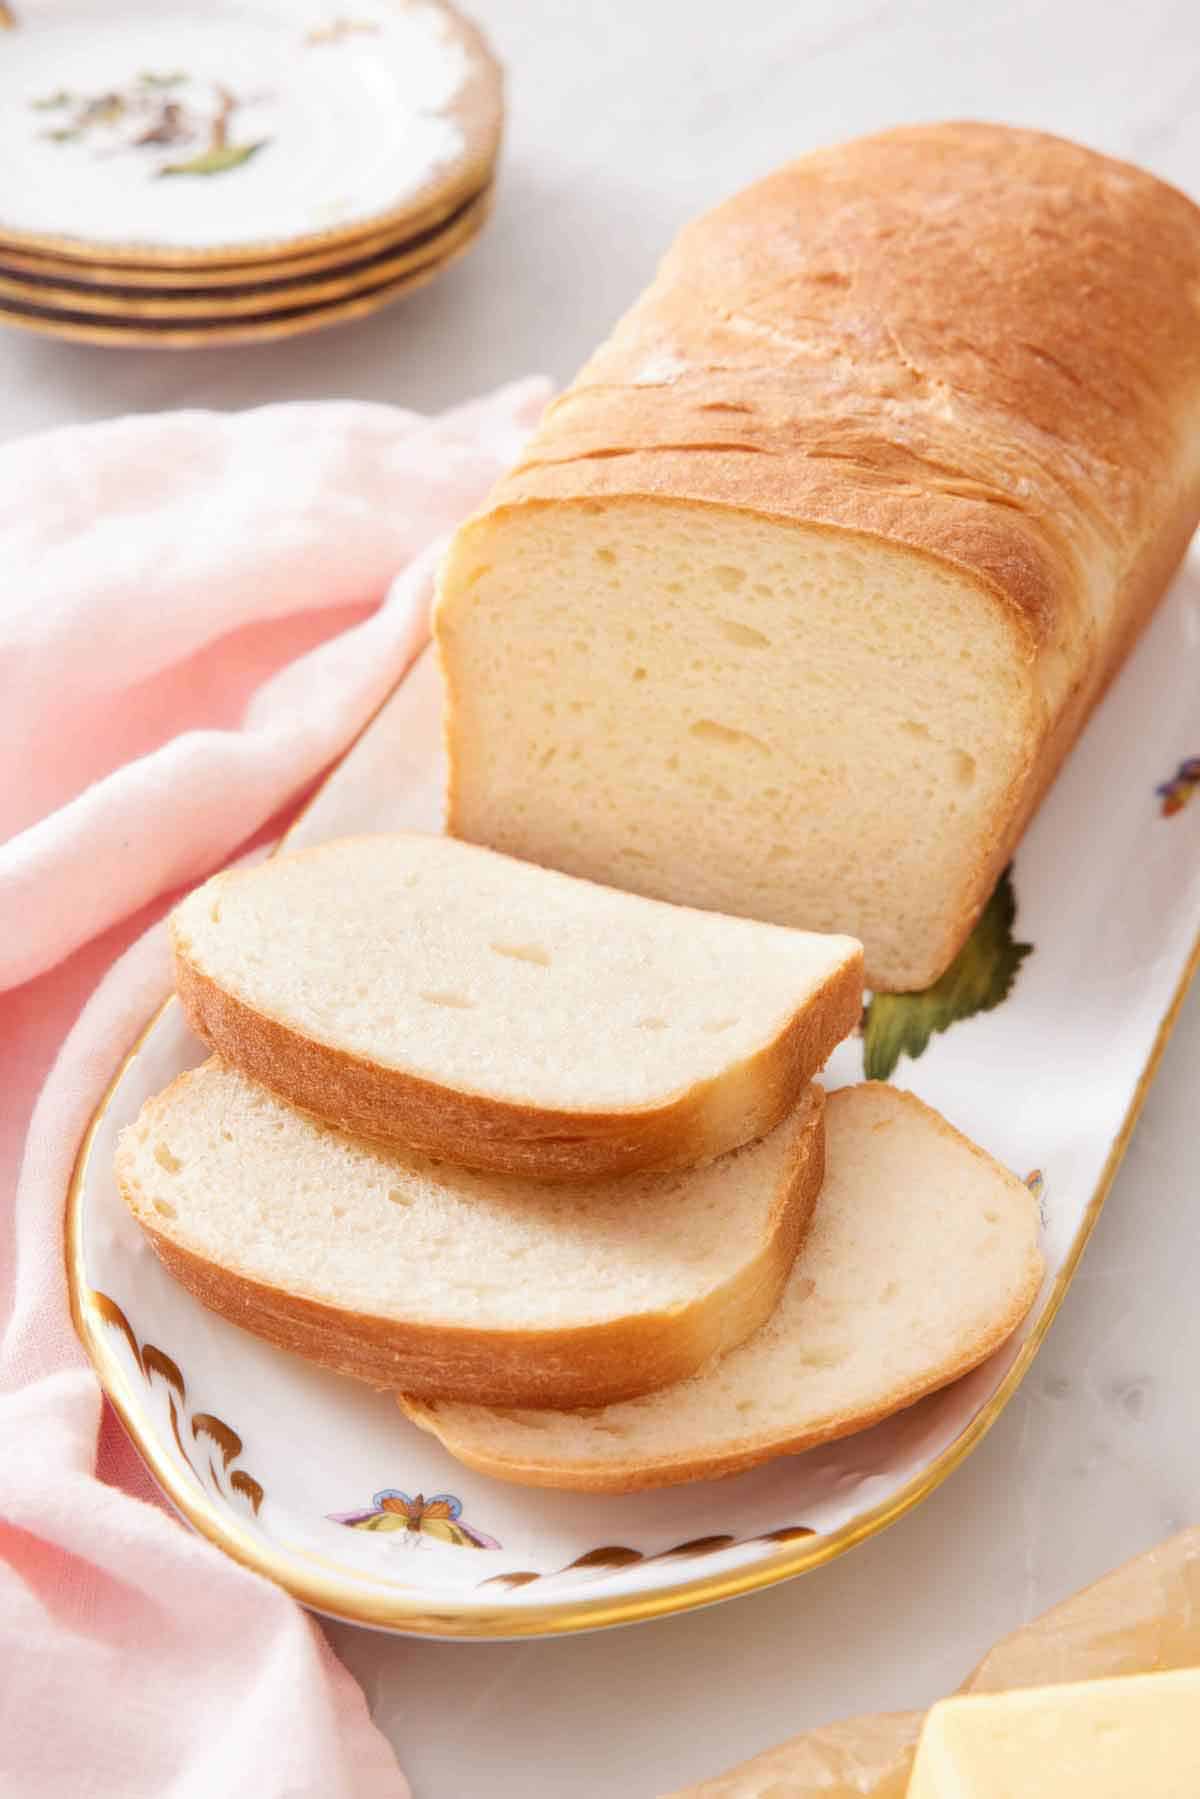 A platter with a loaf of potato bread with three slices cut in front of it.